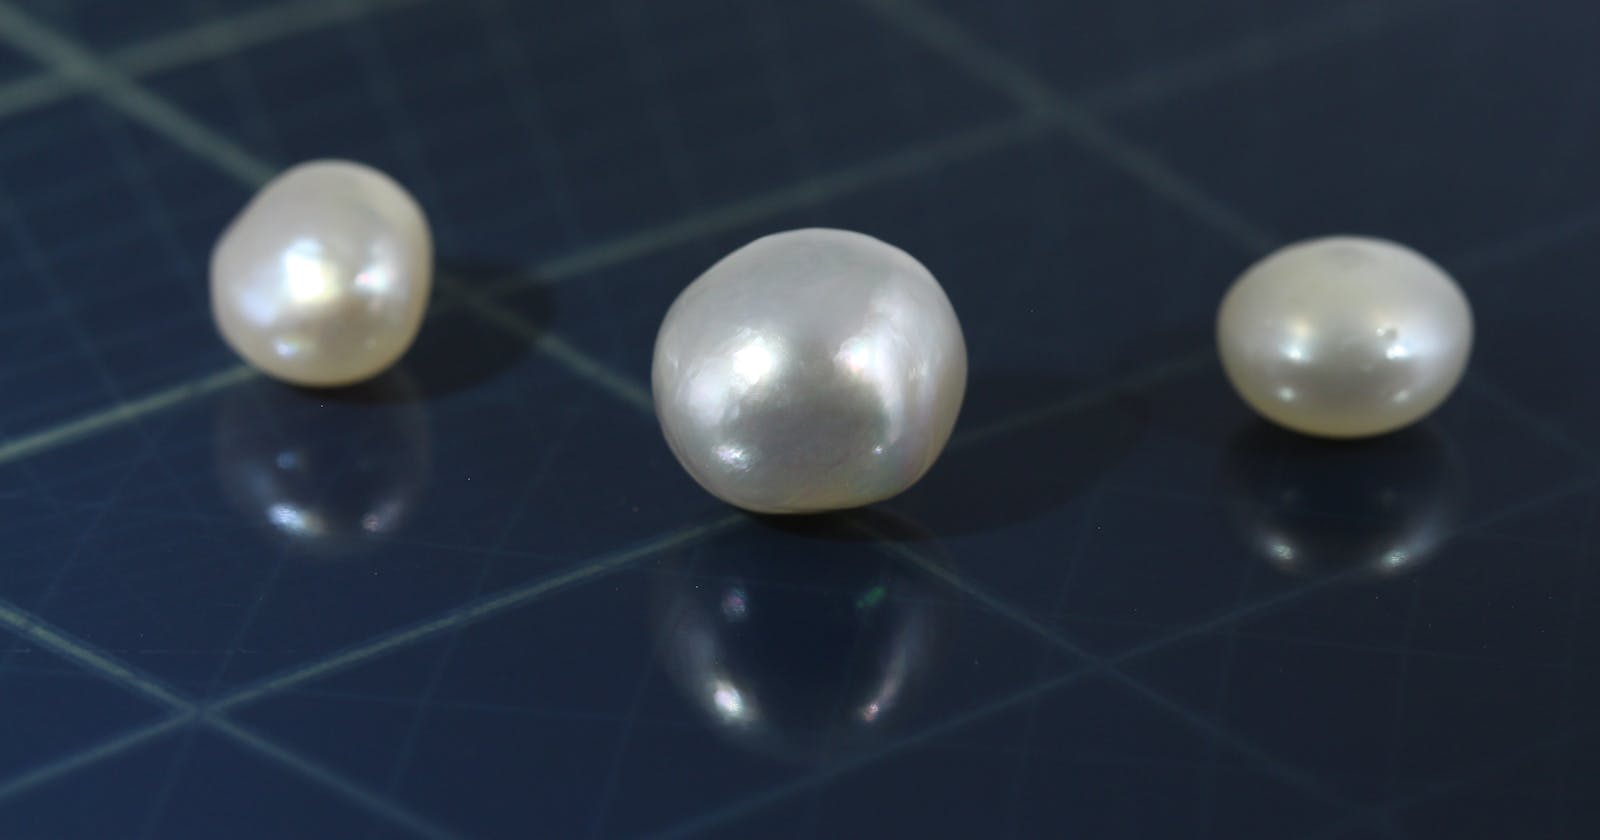 Certified Basra Pearl-purity personified!